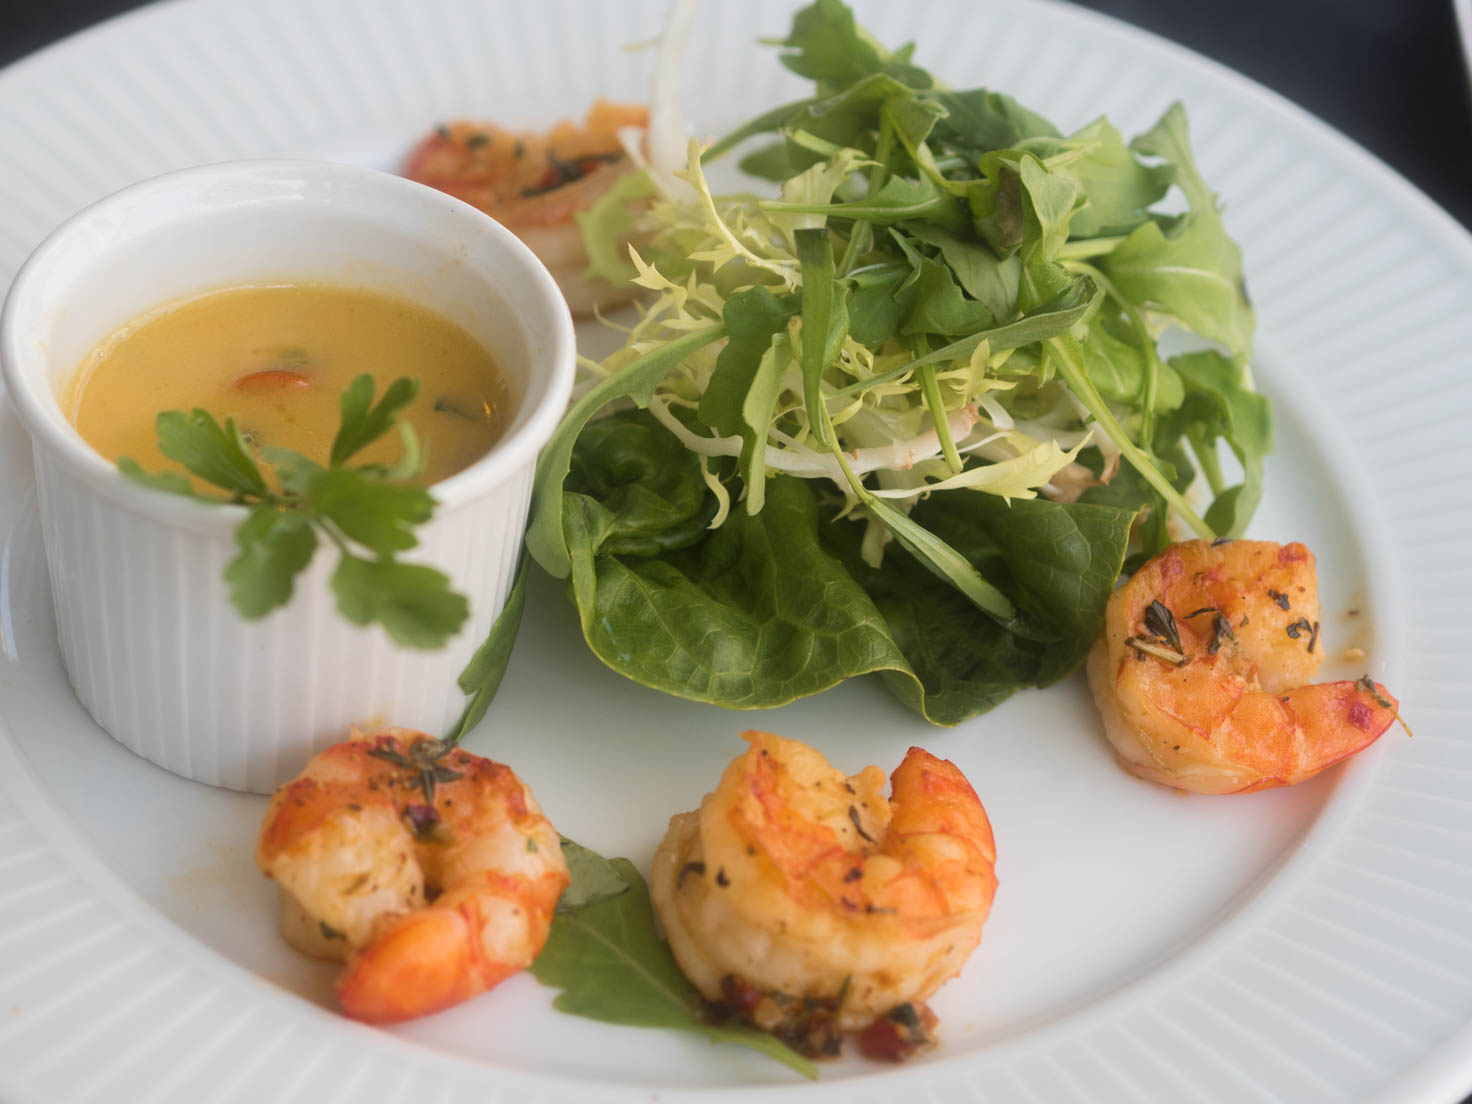 Grilled prawns with green salad and mustard and lemon dressing